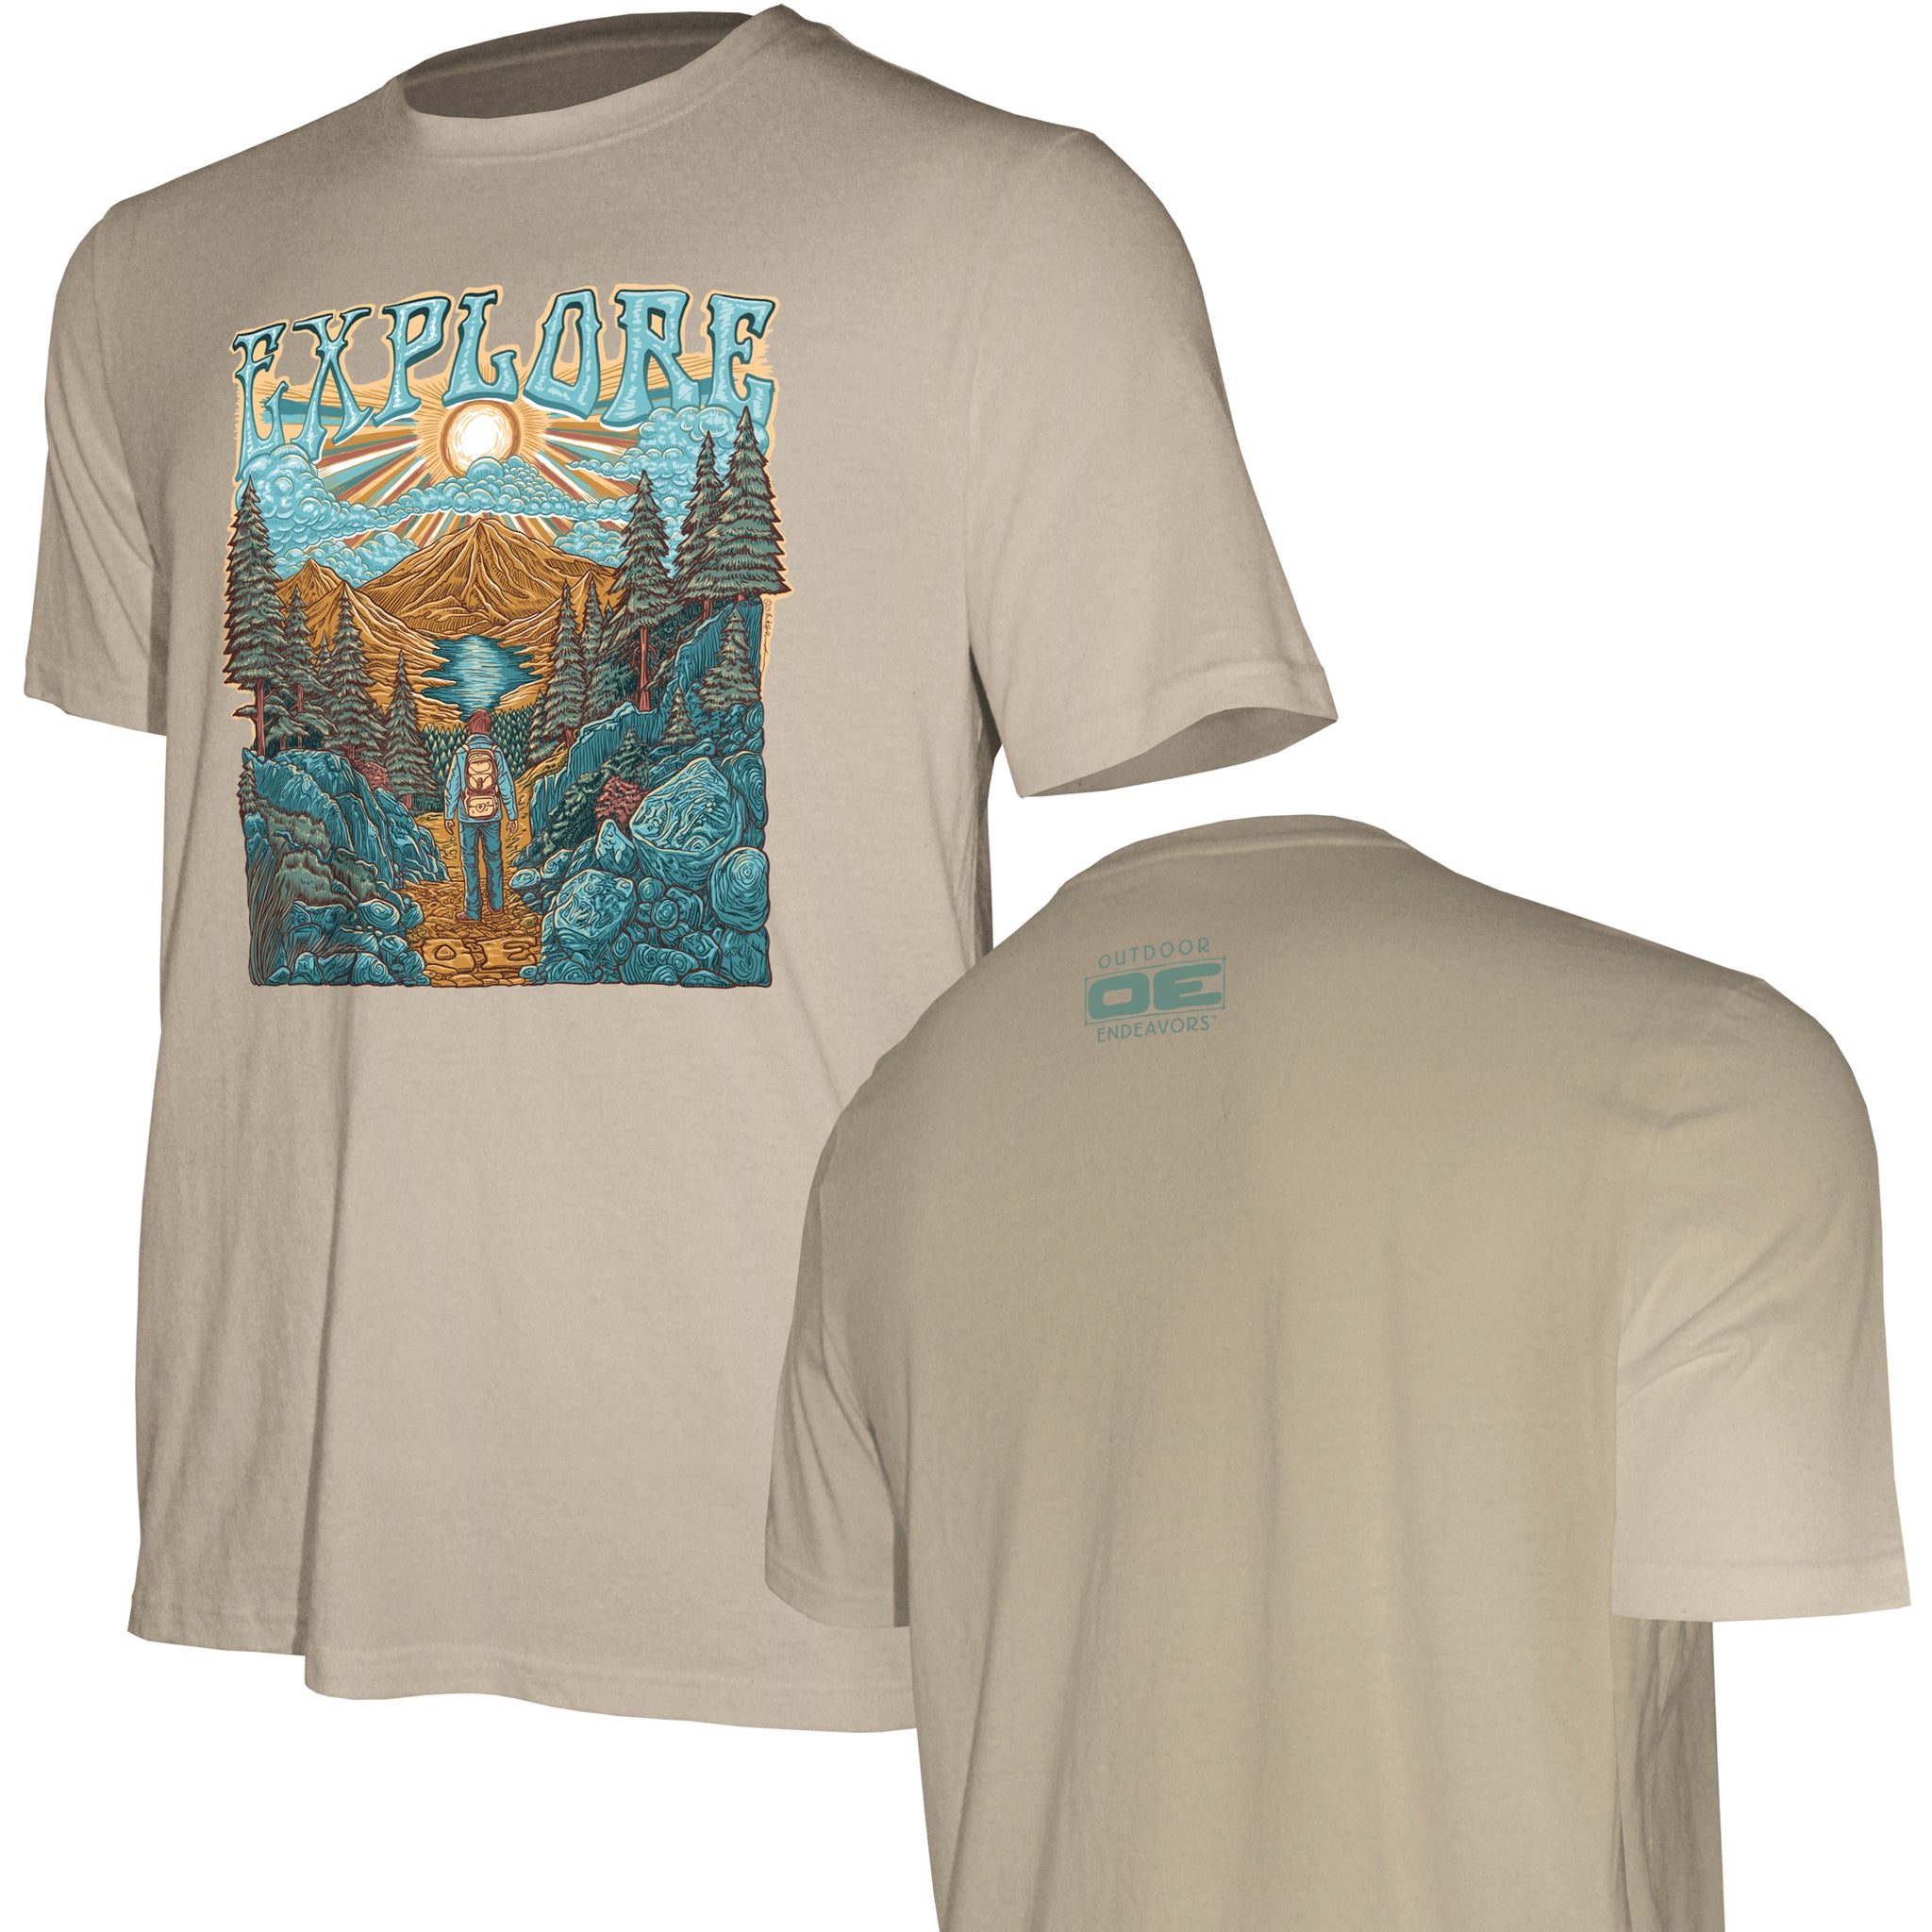 Copy of Outdoor Endeavors Out There- American Made Tee - EXPLORE FRONT